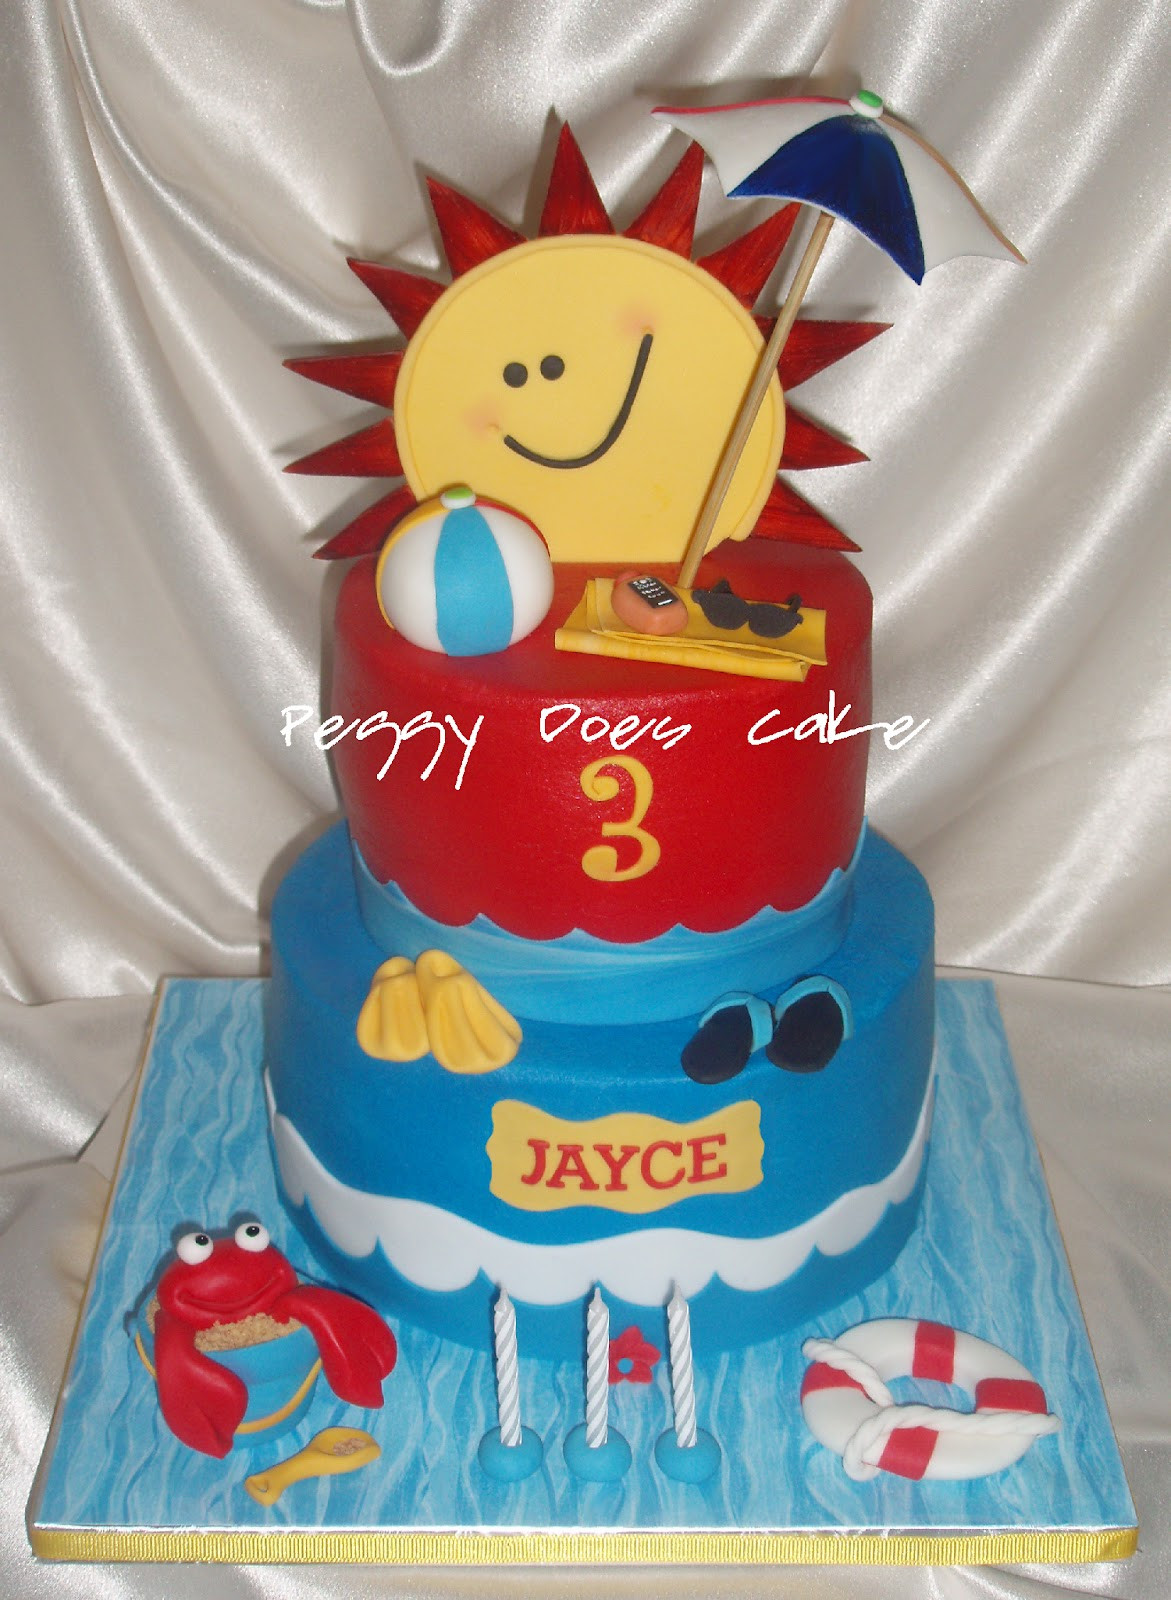 Pool Party Cakes Ideas
 Peggy Does Cake Cake Update Pool Party Cake for Jayce